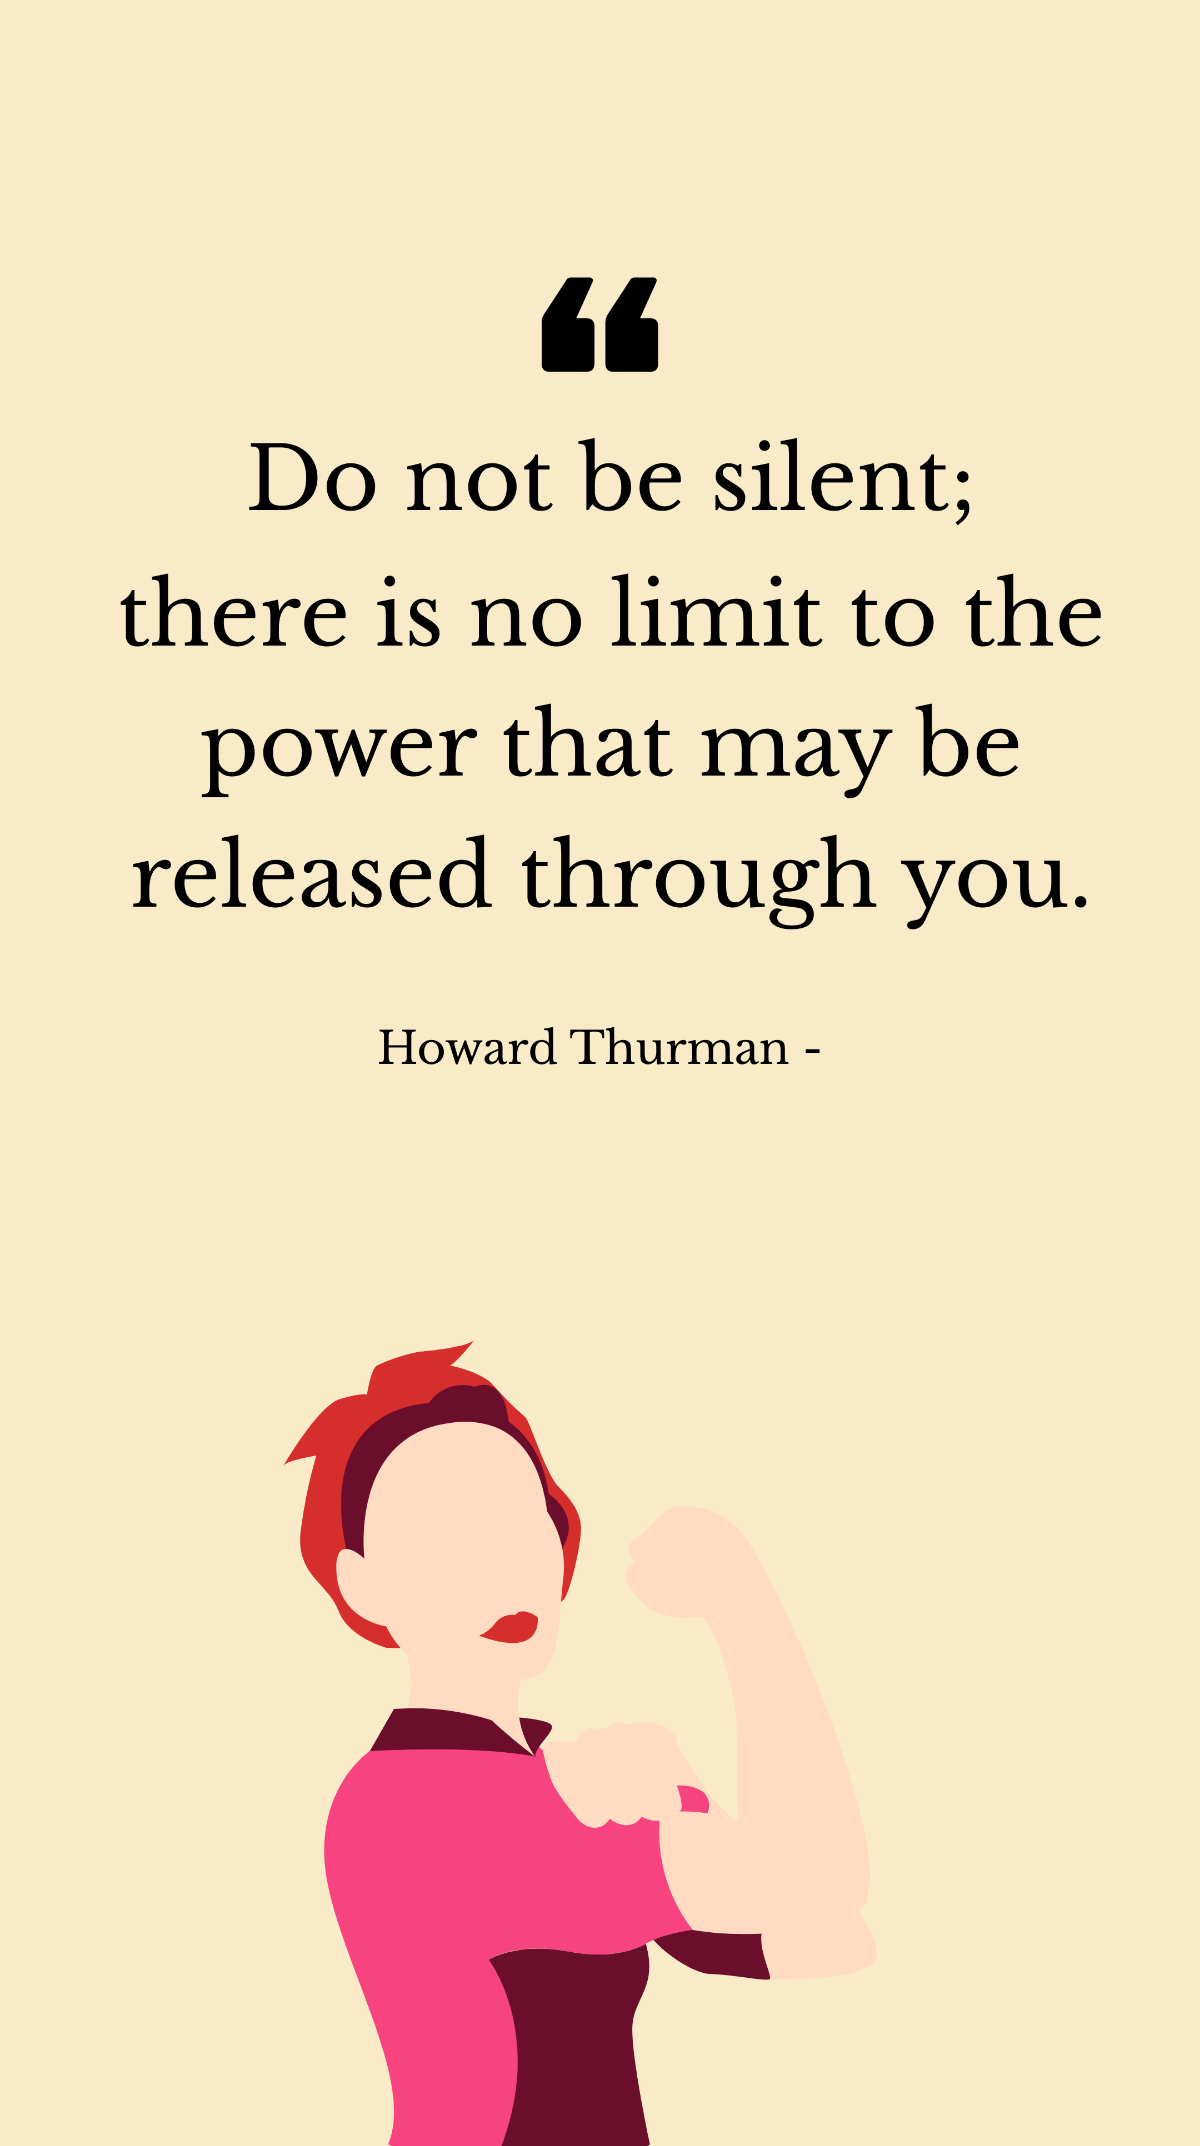 Howard Thurman - Do not be silent; there is no limit to the power that may be released through you.